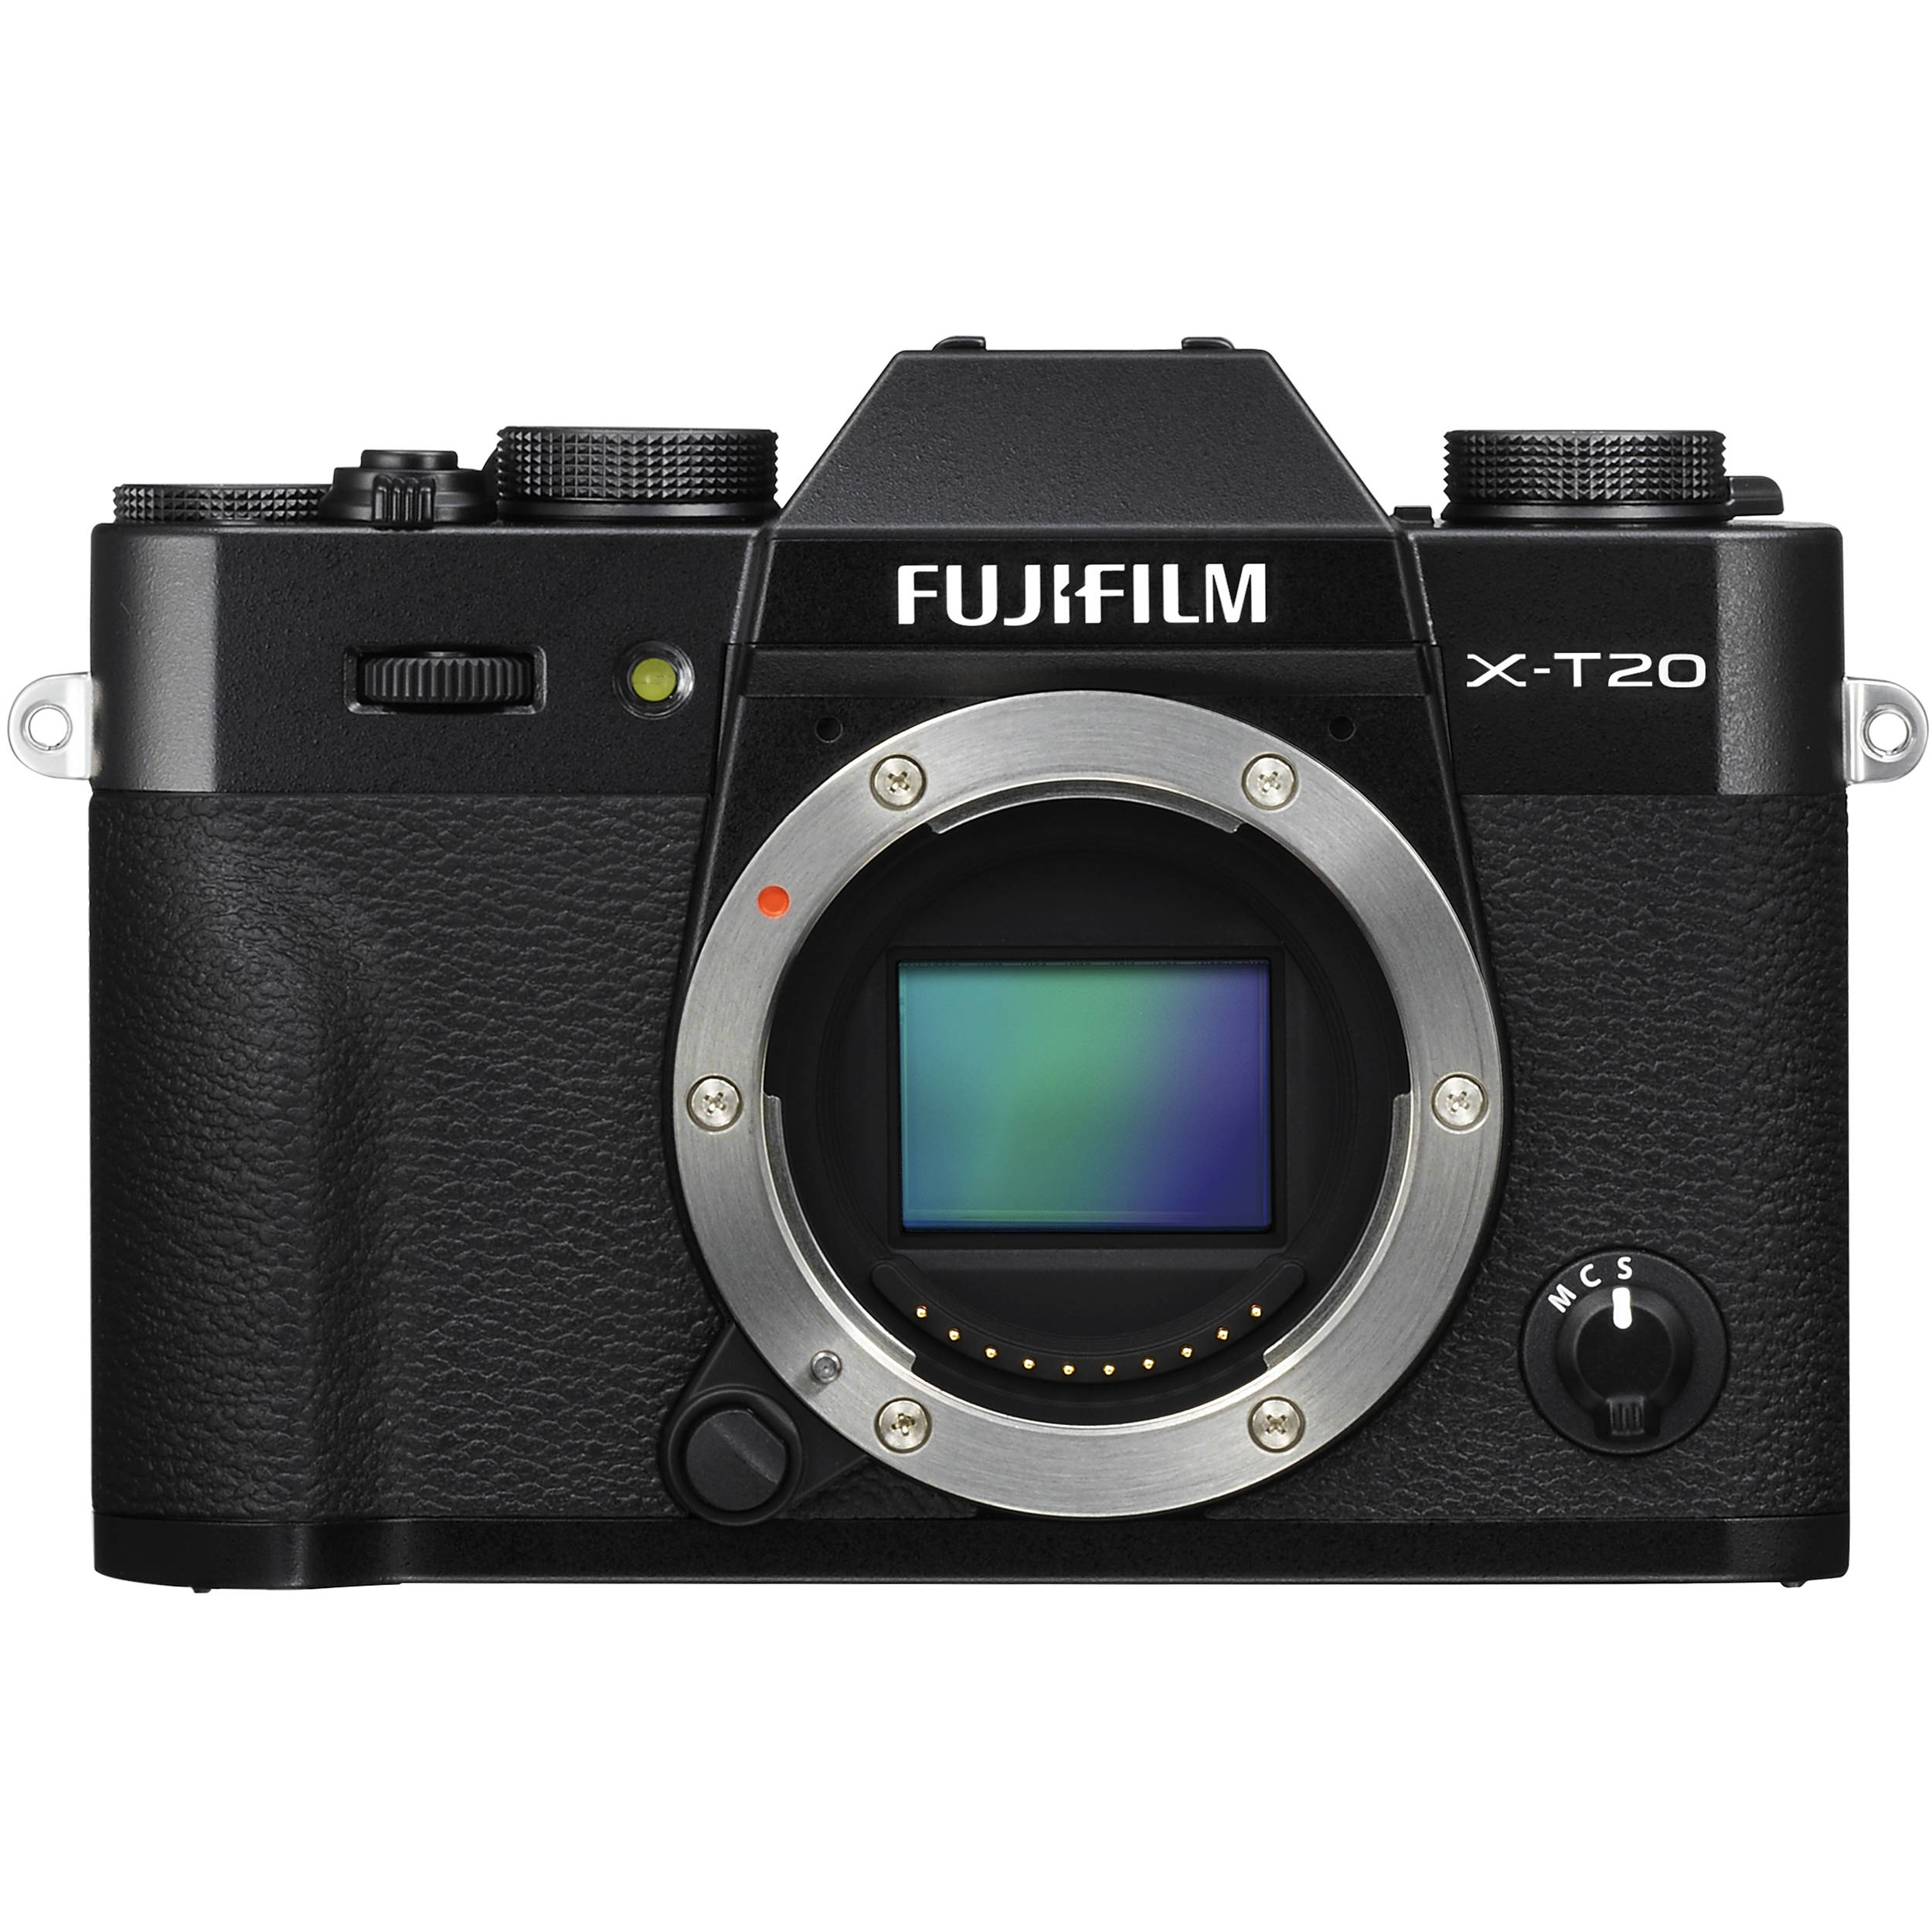 FUJIFILM X-T20, TECHNOLOGY AND DESIGN FOR STREET AND TRAVEL PHOTOGRAPHY